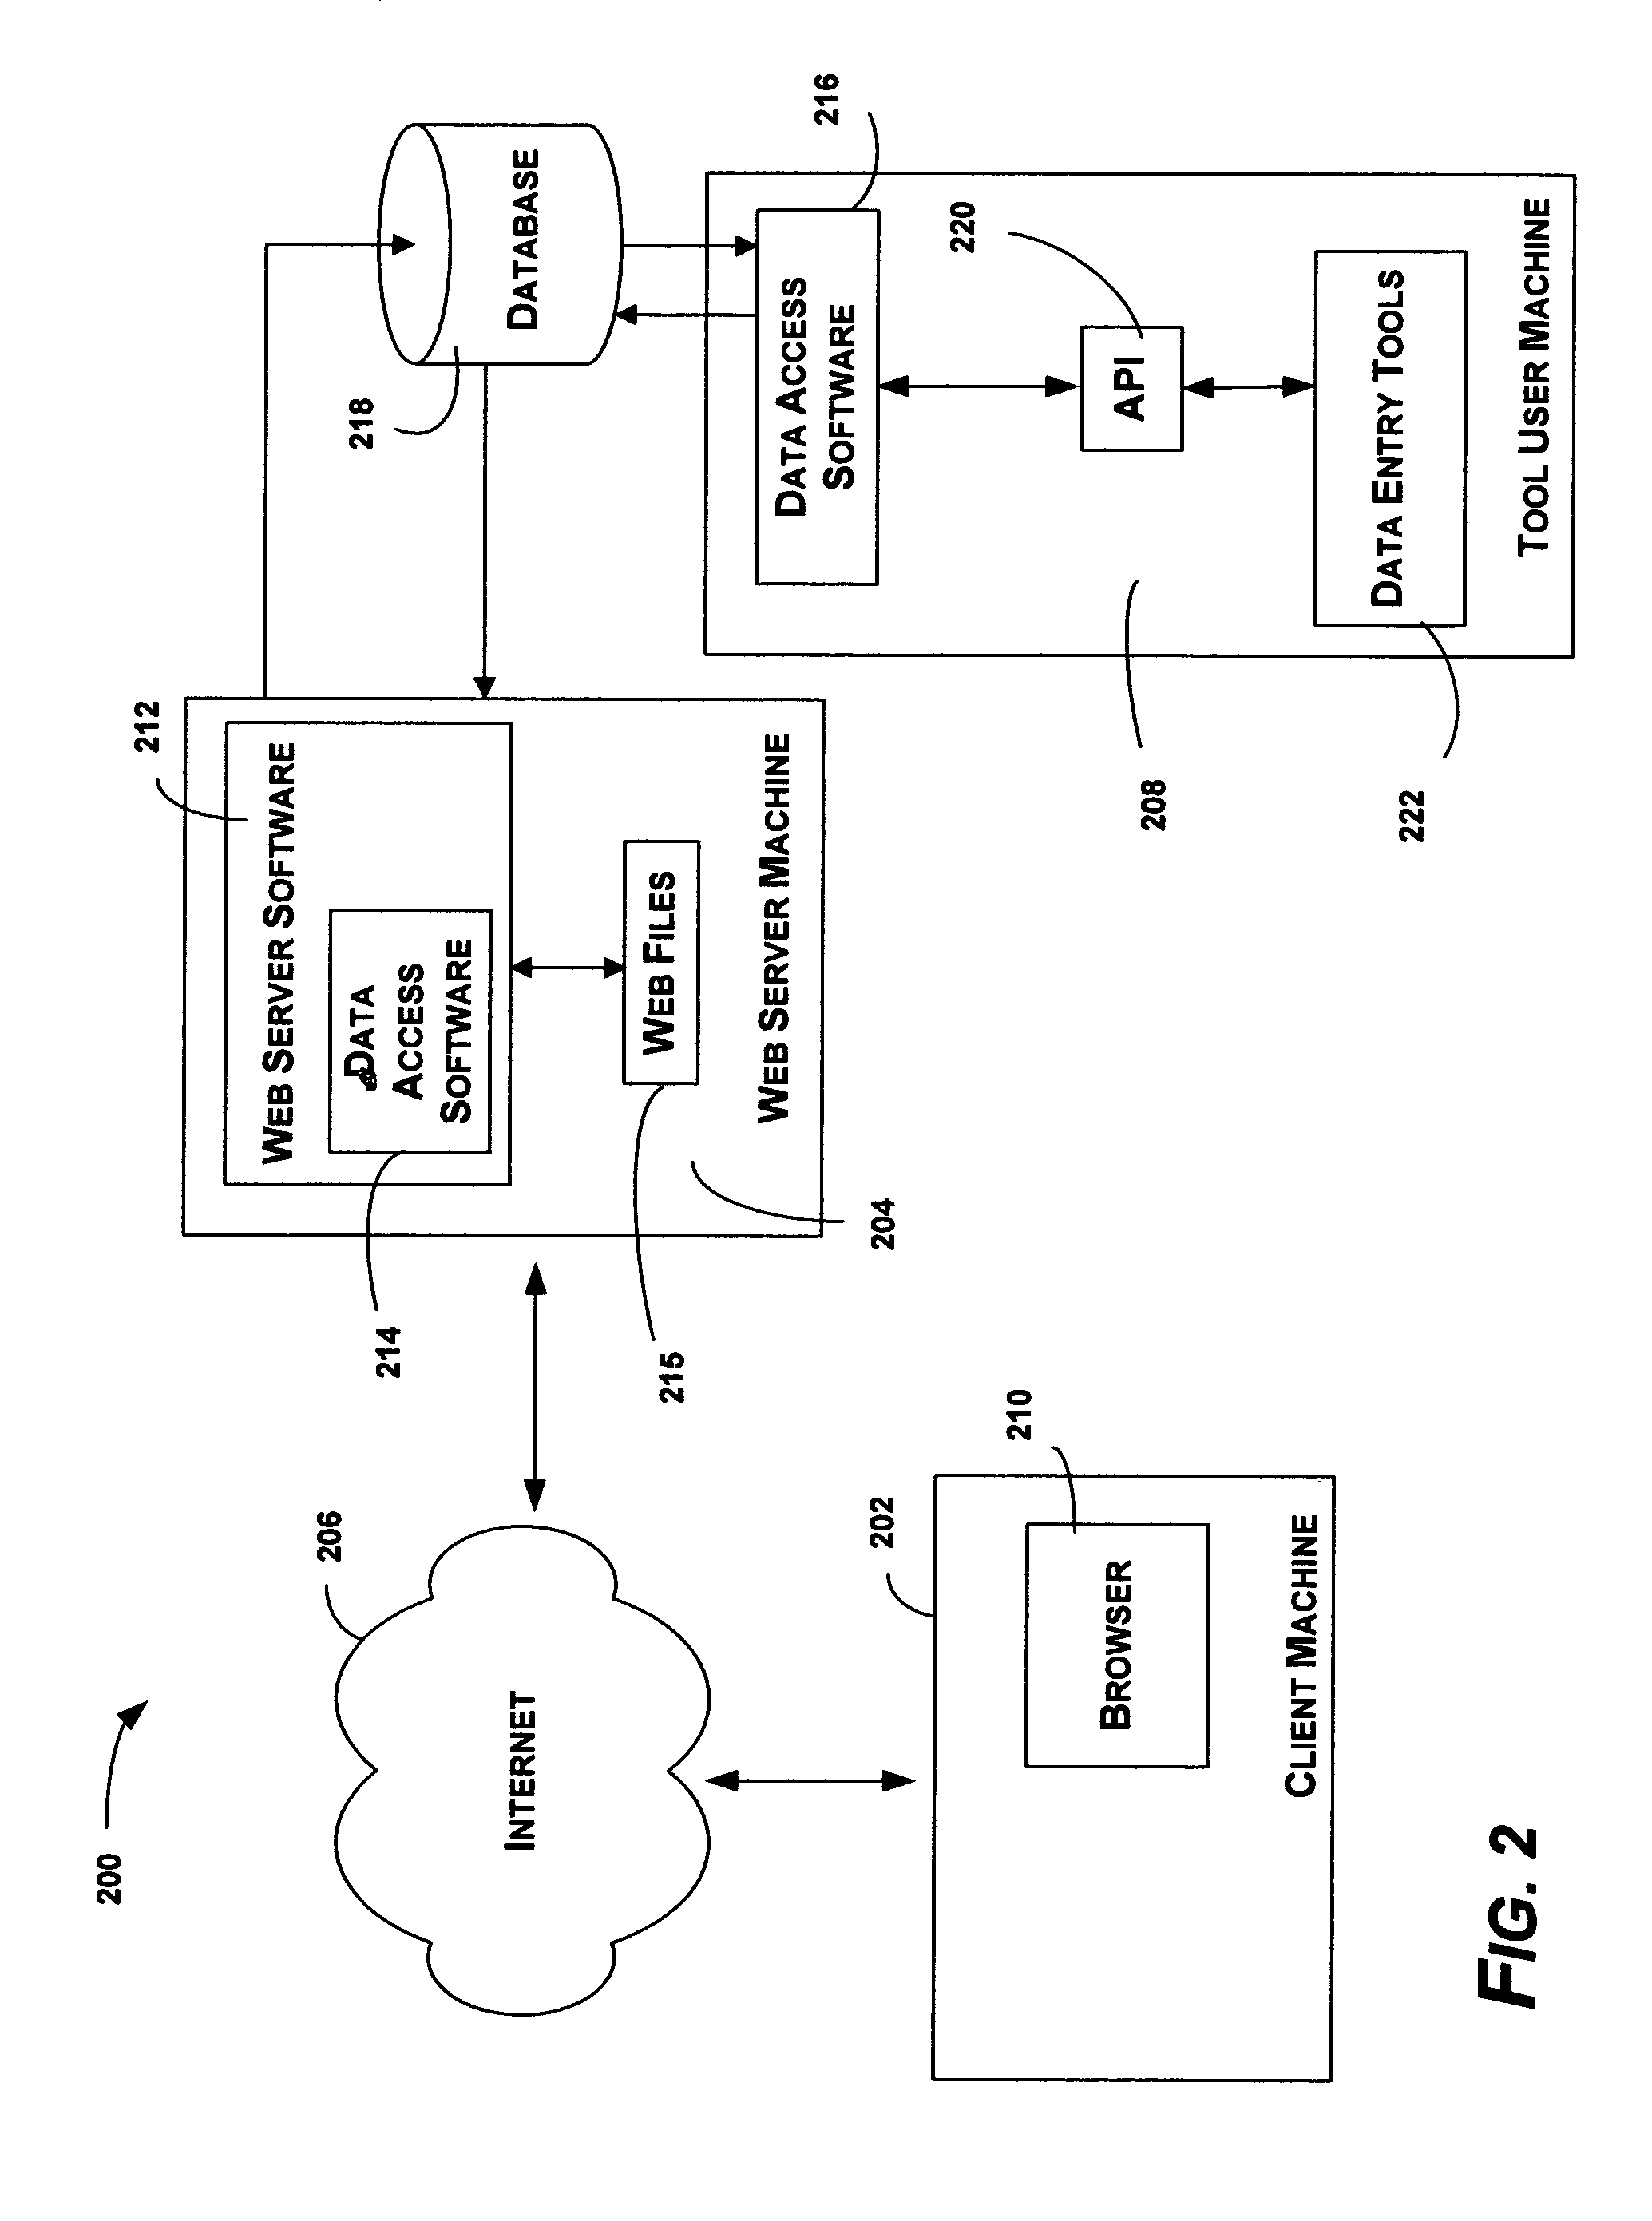 Method and system for providing service listings in electronic yellow pages